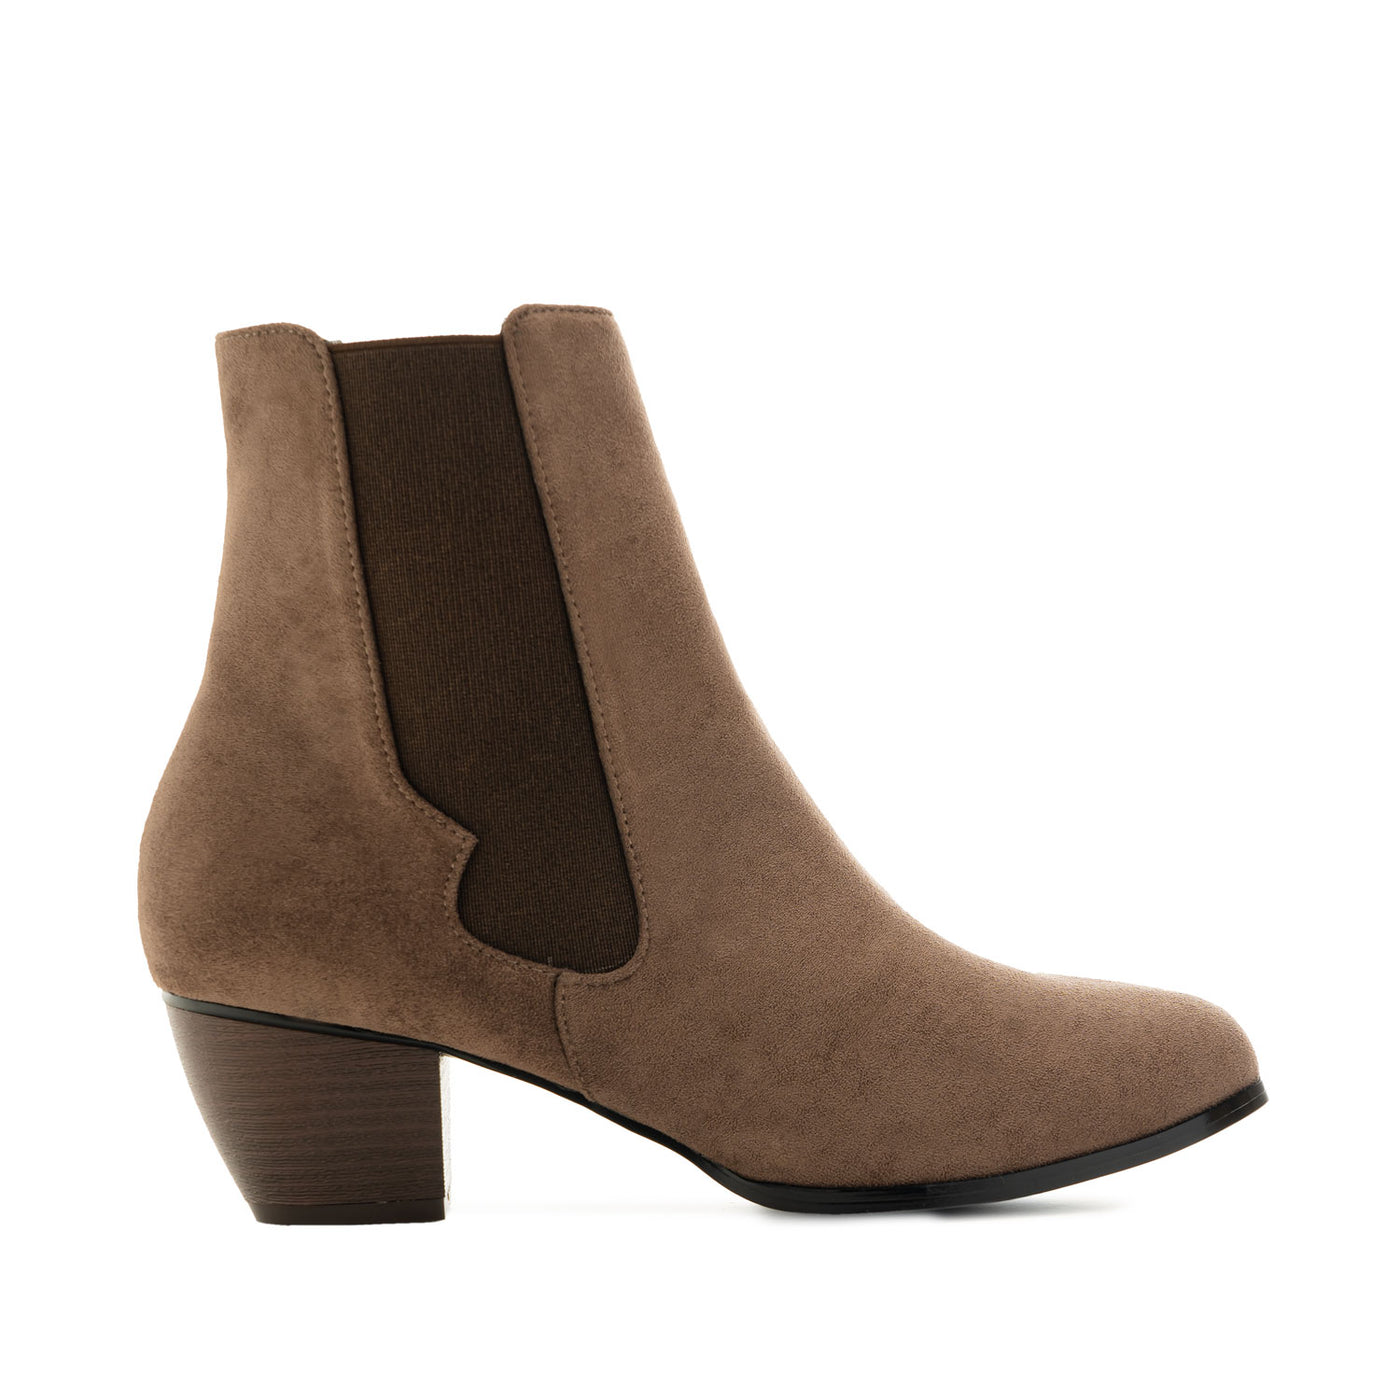 Chelsea Boots in Taupe Suedette